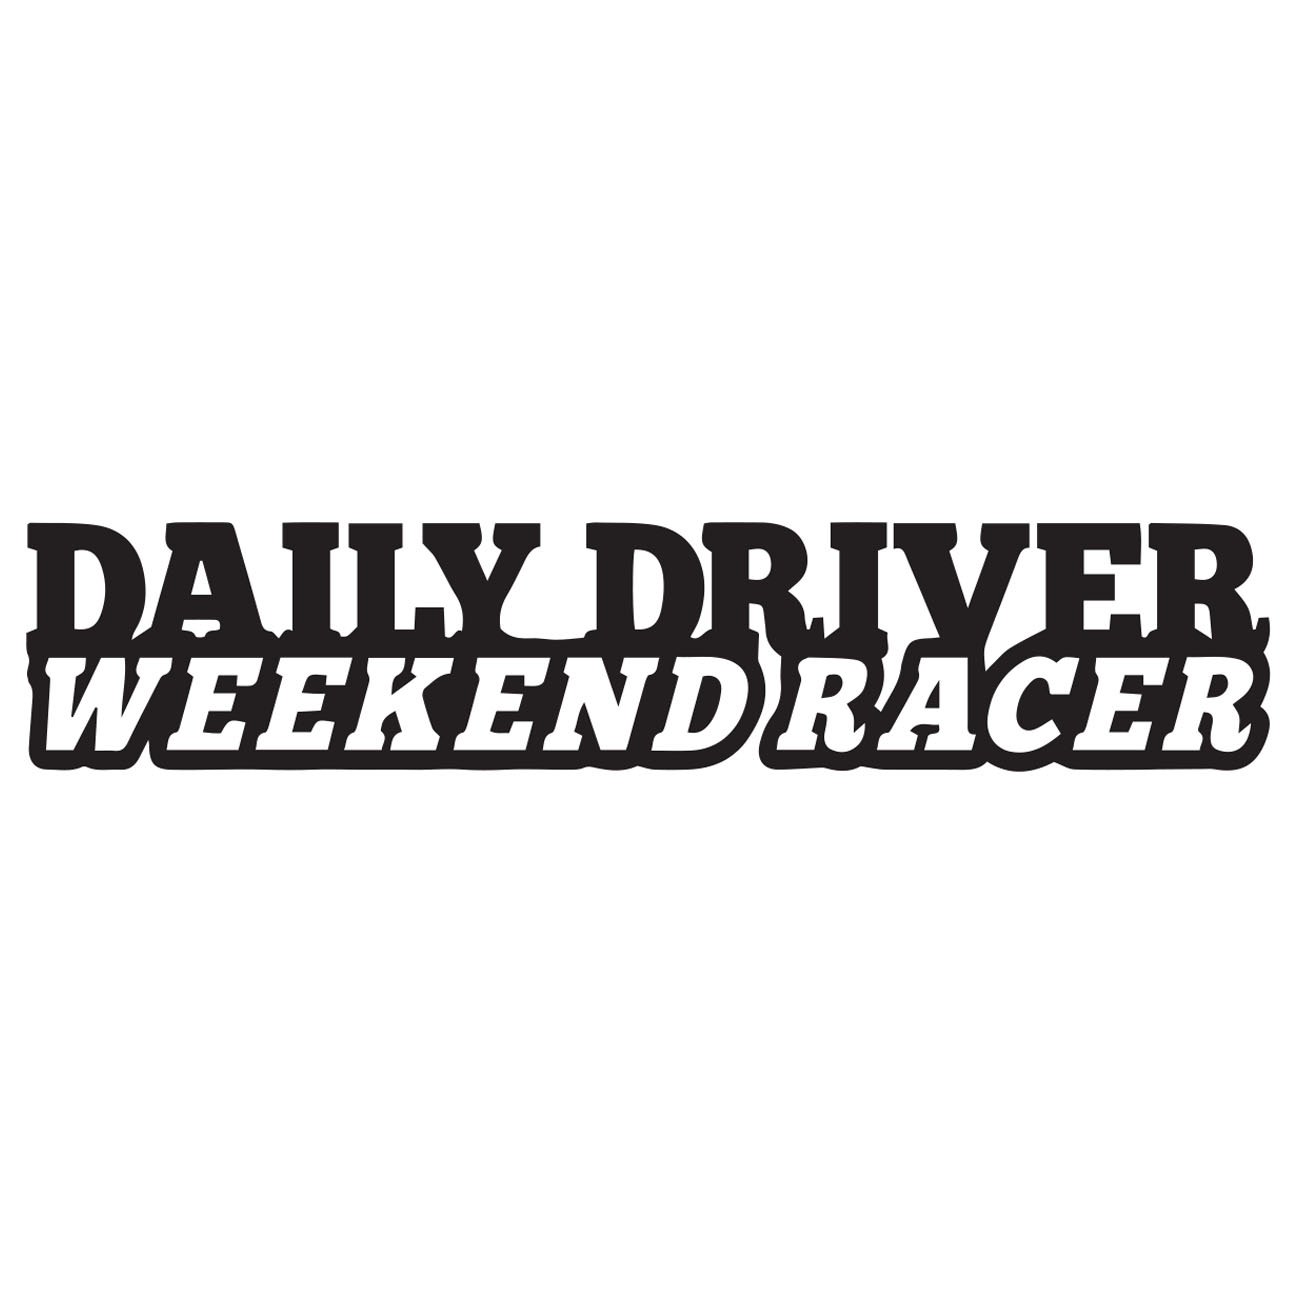 Daily Driver - Weekend Racer